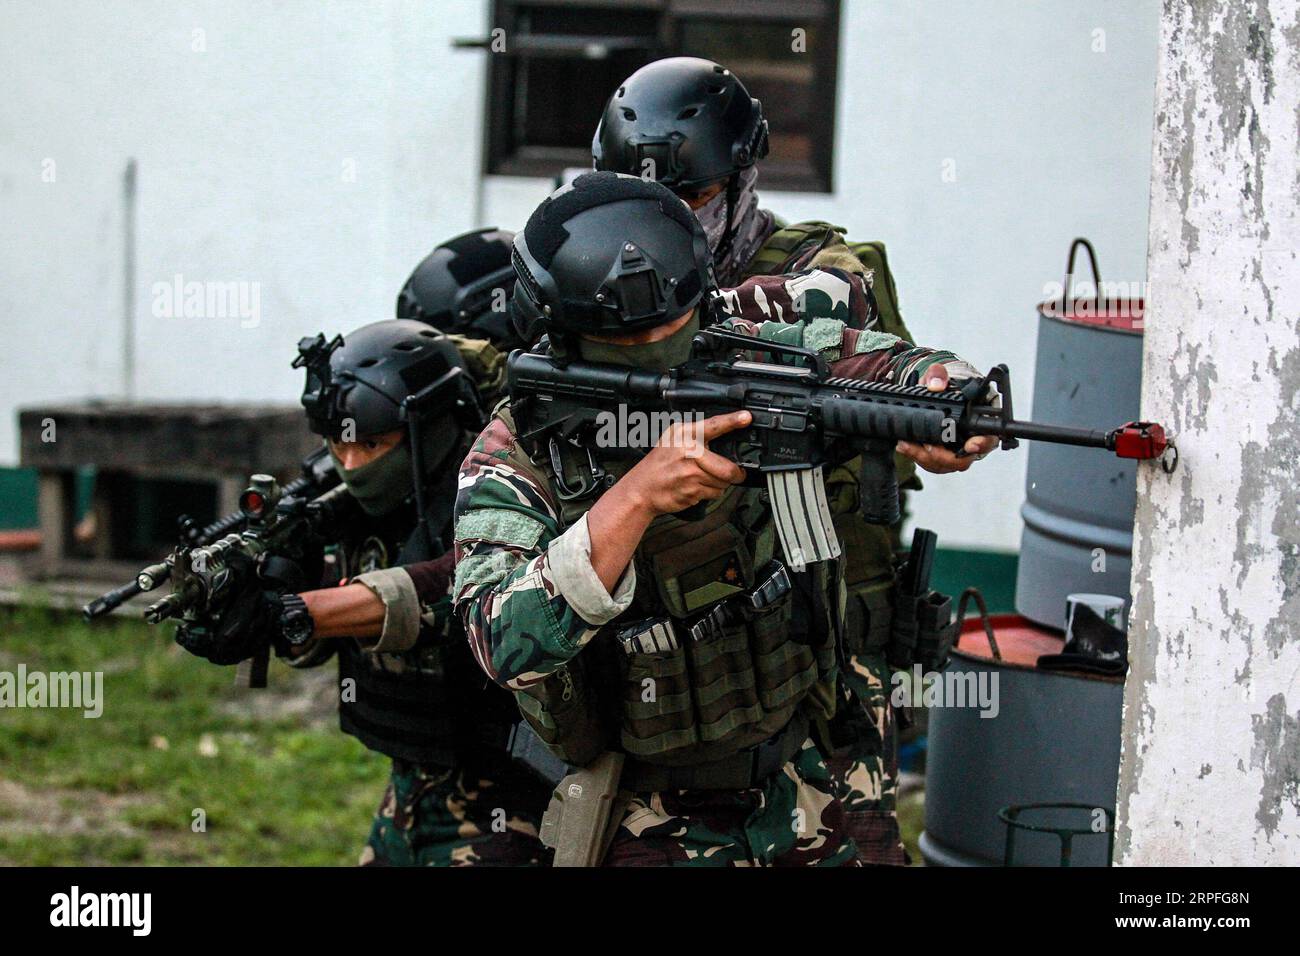 190924 -- NUEVA ECIJA PROVINCE, Sept. 24, 2019 -- Soldiers from the Armed Forces of the Philippines AFP participate in the DAGIT-PA sea, air, land military exercise inside Fort Magsaysay in Nueva Ecija province, the Philippines, Sept. 23, 2019. The AFP held a combined military exercise to improve the inter-operability between the main service branches: the Army, the Navy and the Air Force.  THE PHILIPPINES-NUEVA ECIJA-AFP-MILITARY EXERCISE ROUELLExUMALI PUBLICATIONxNOTxINxCHN Stock Photo